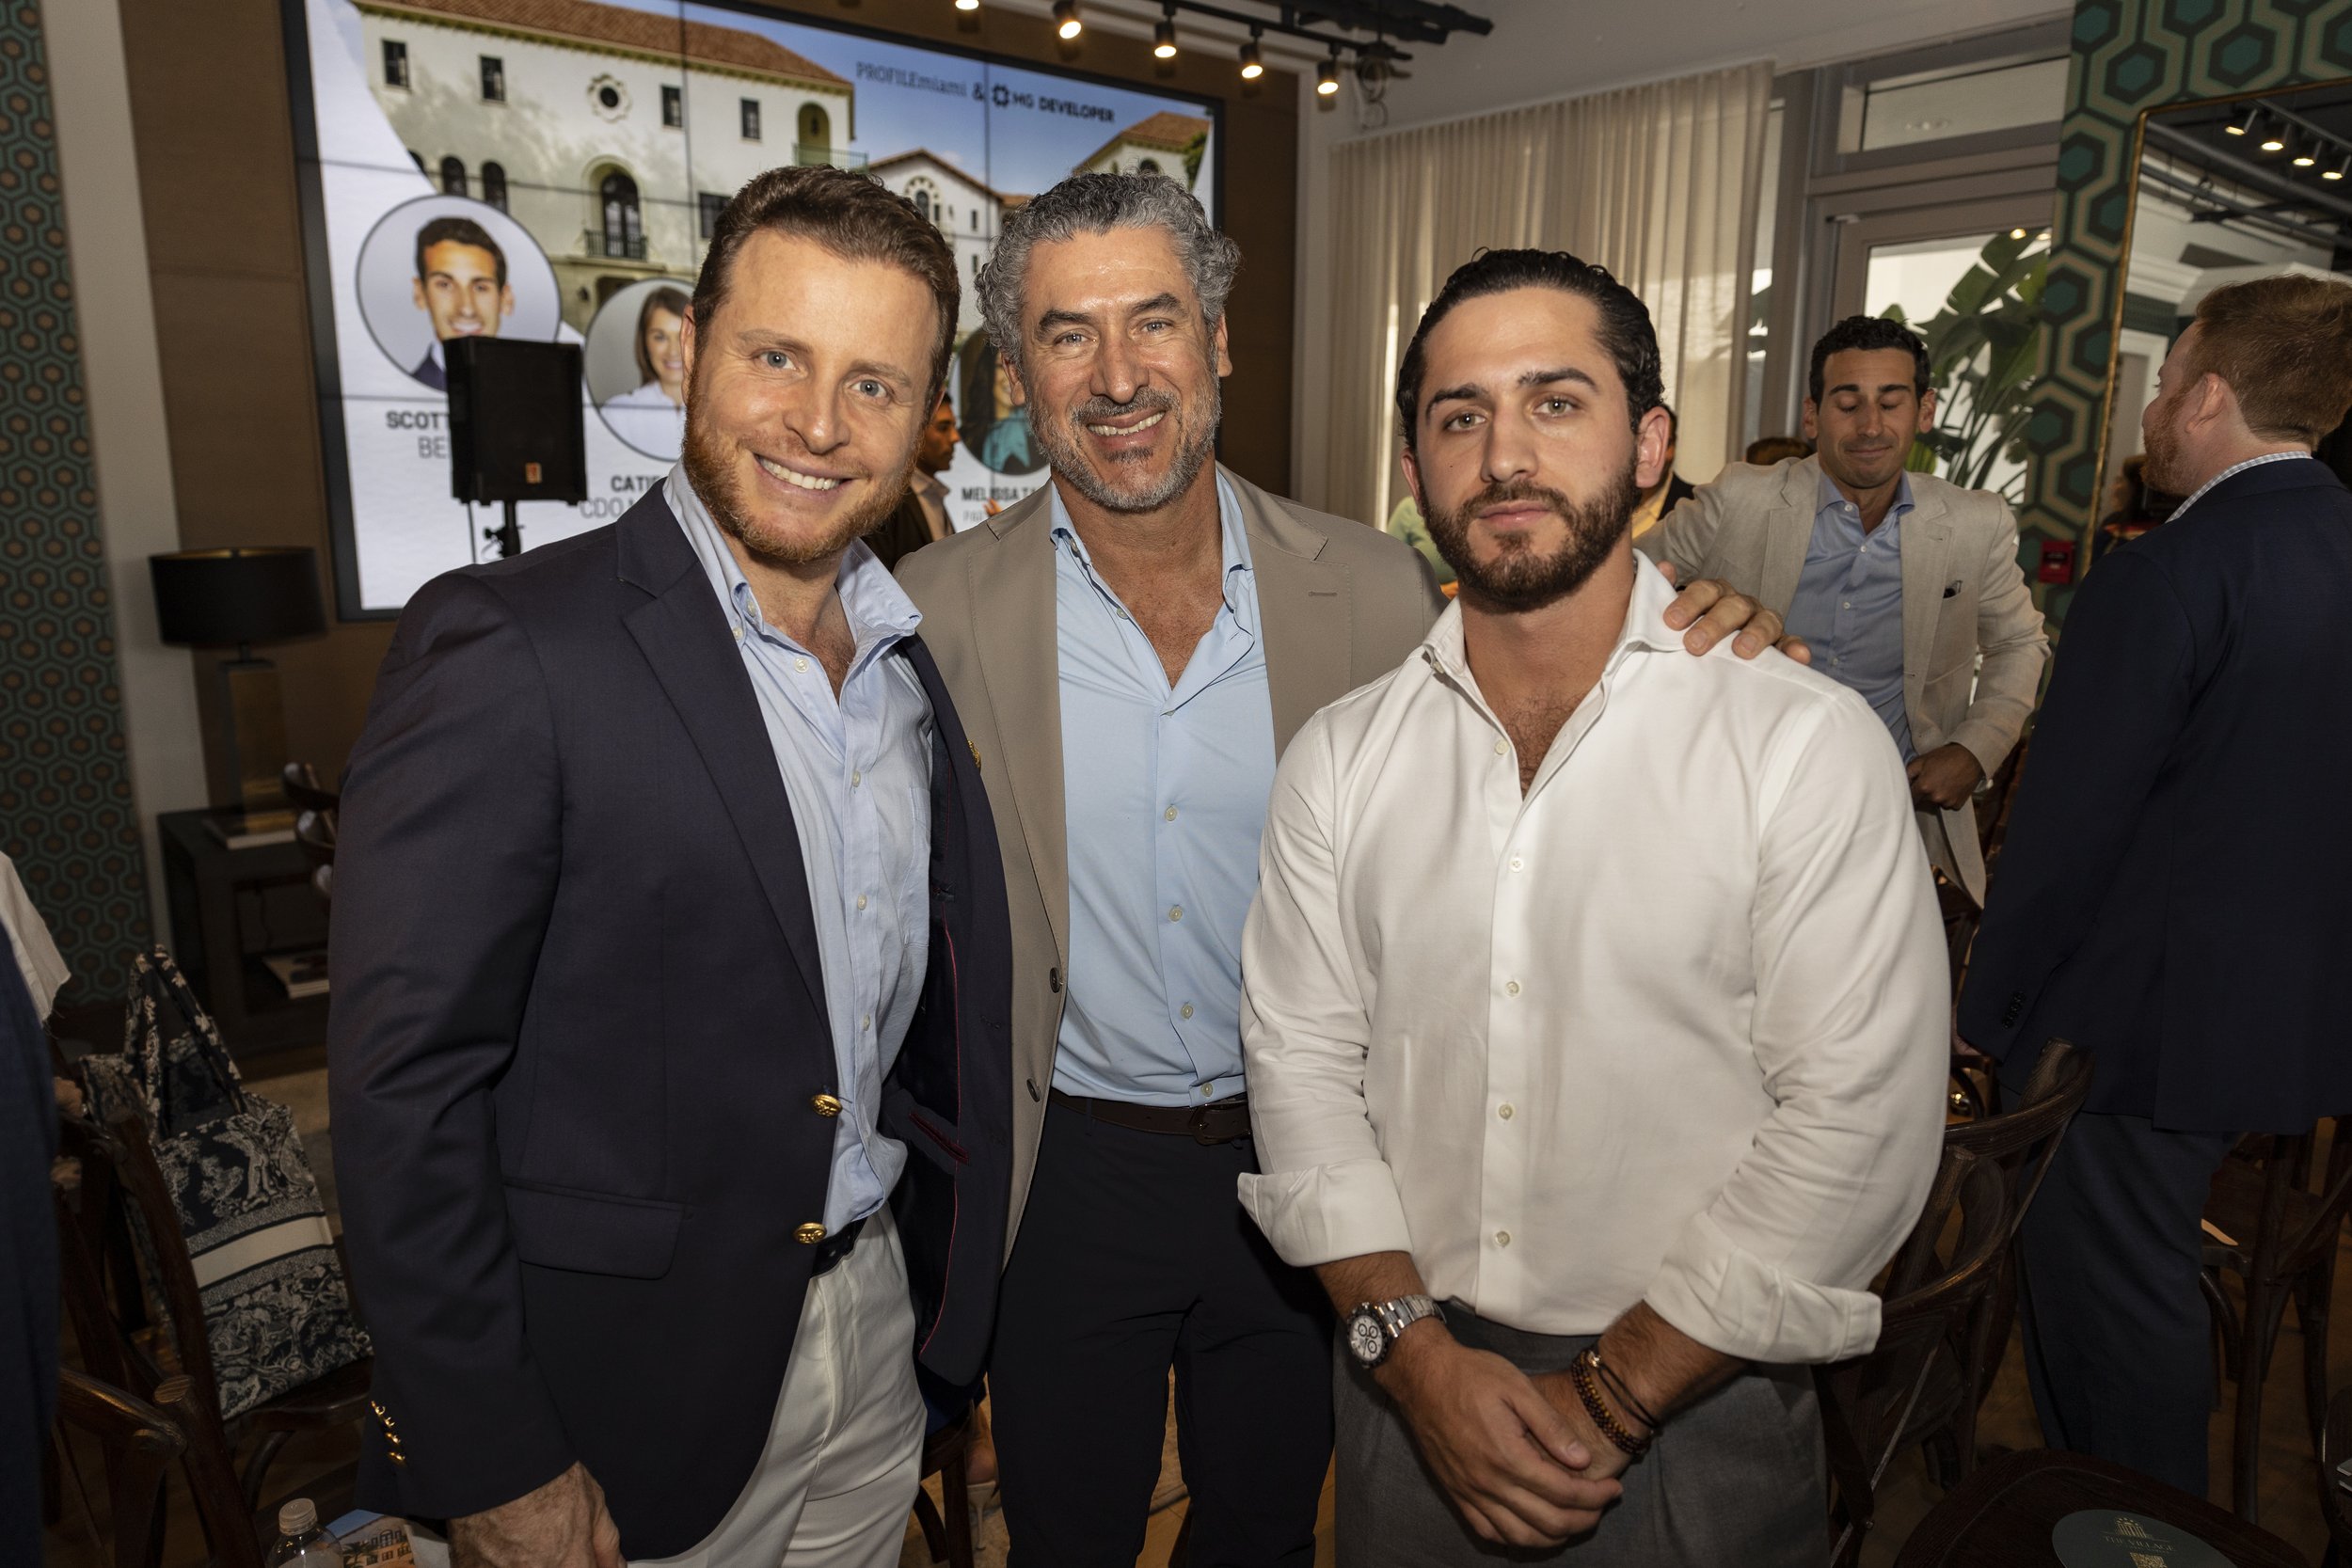 Inside 'An Exploration Into Capital Markets Coral Gables' Presented By PROFILEmiami & MG Developer118.JPG